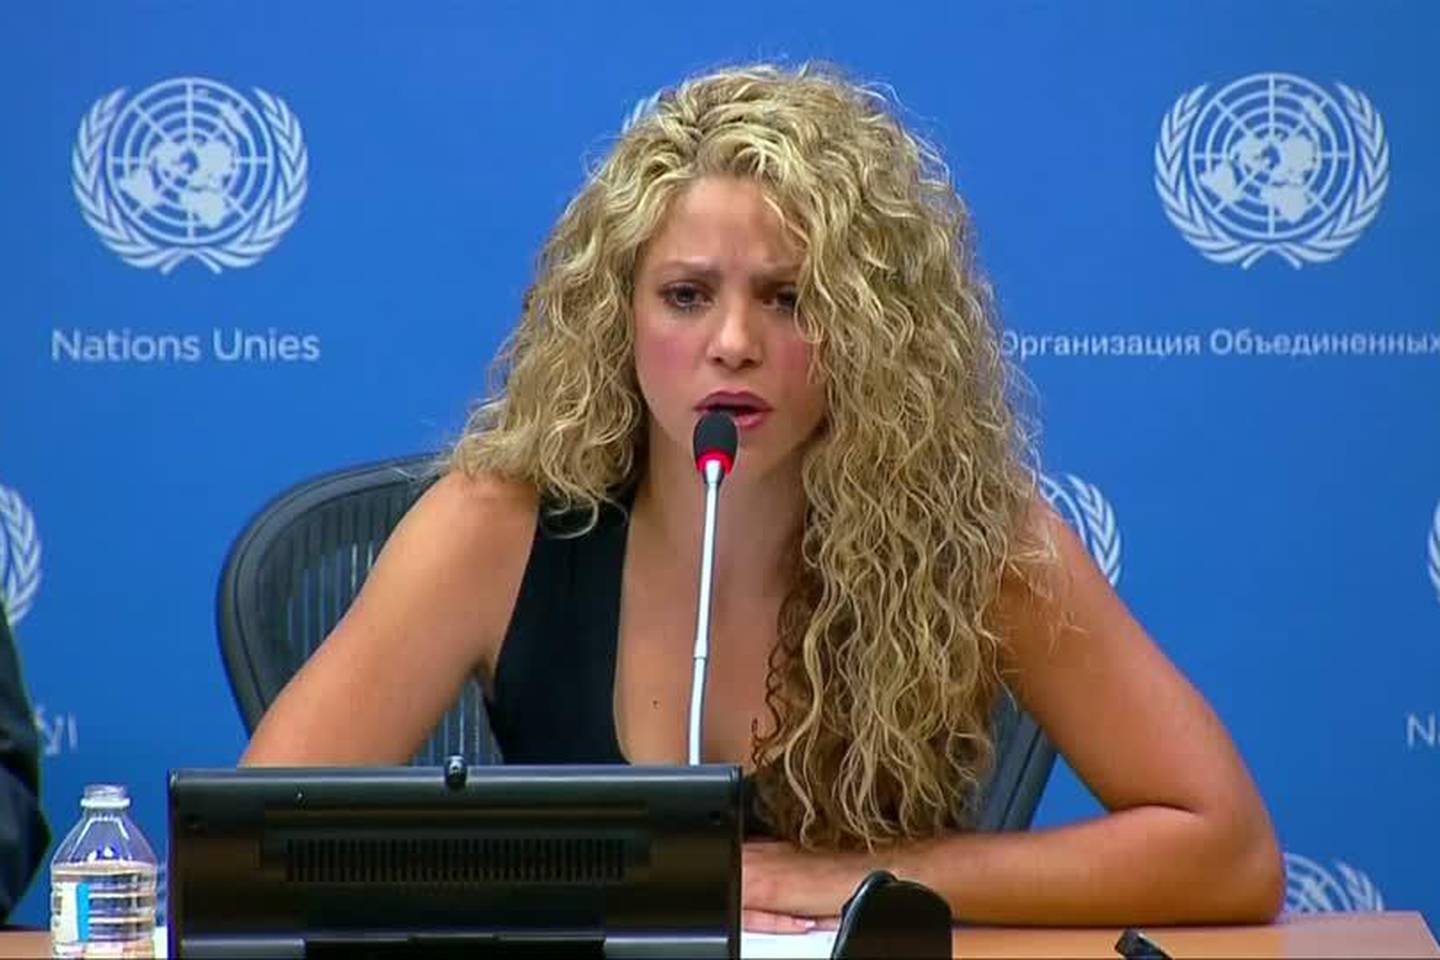 Shakira: children should not pay the price of war - video